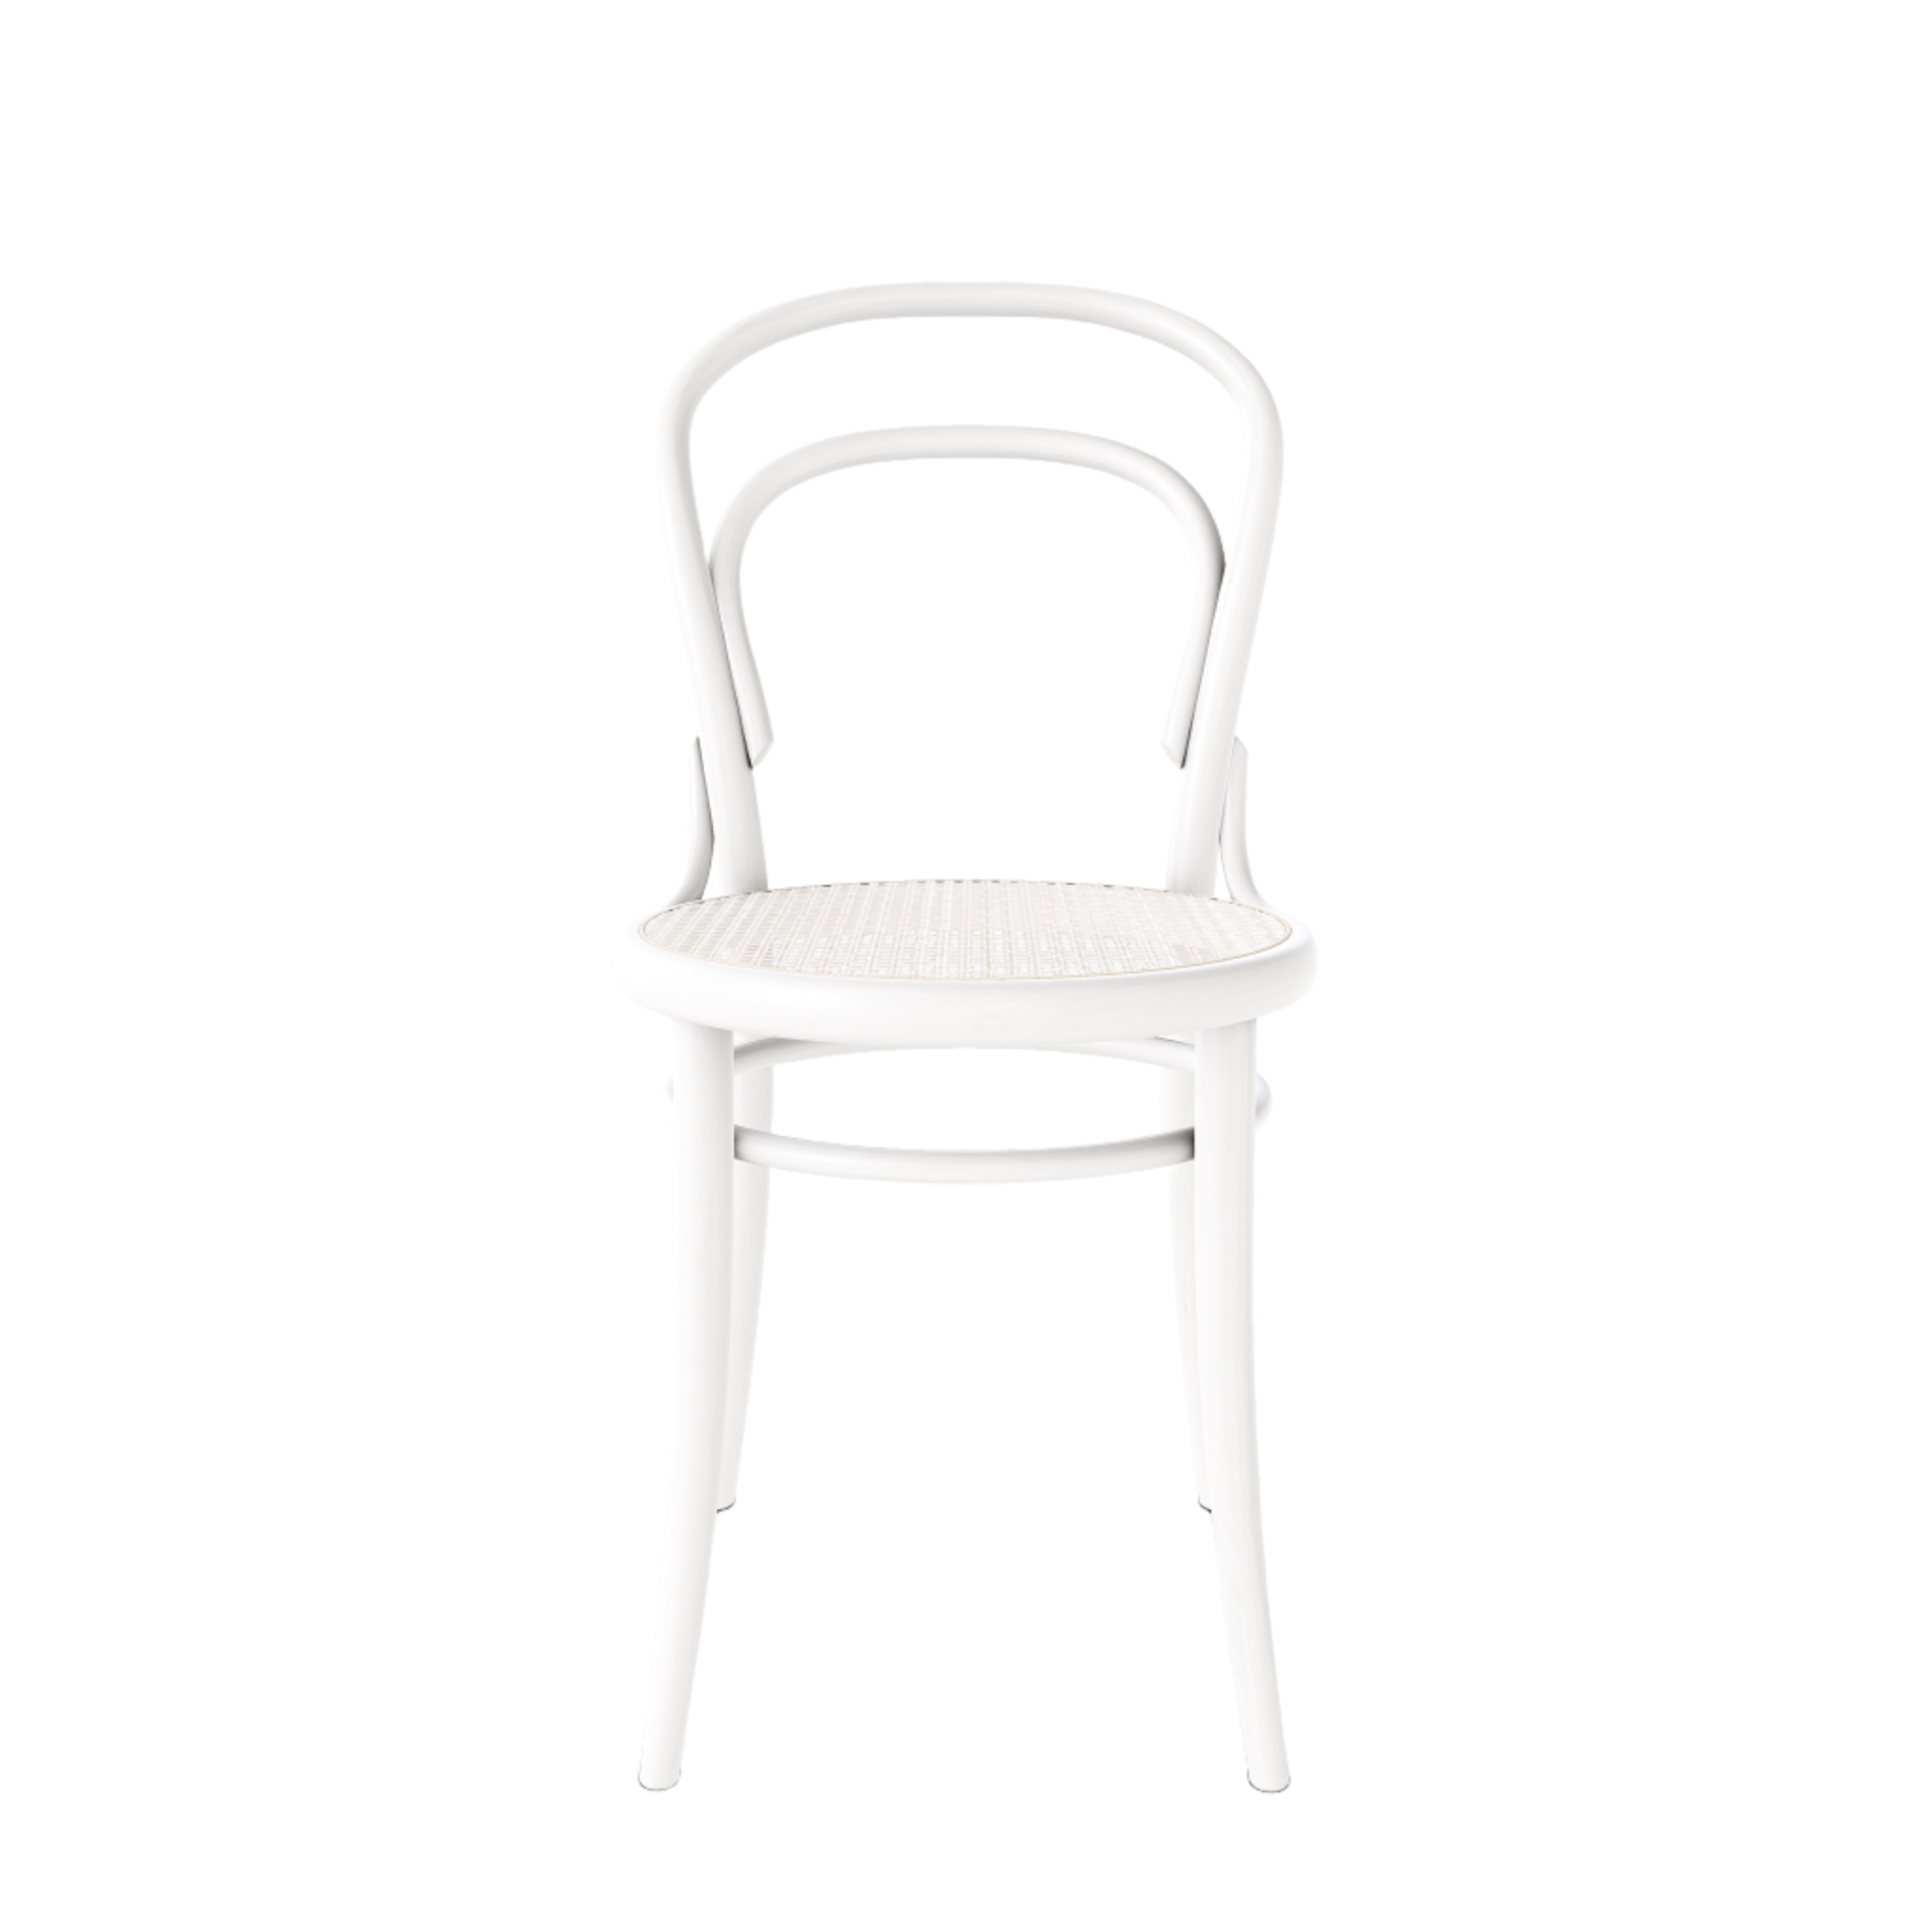 Ton 14 Dining Chair with cane seat in light white